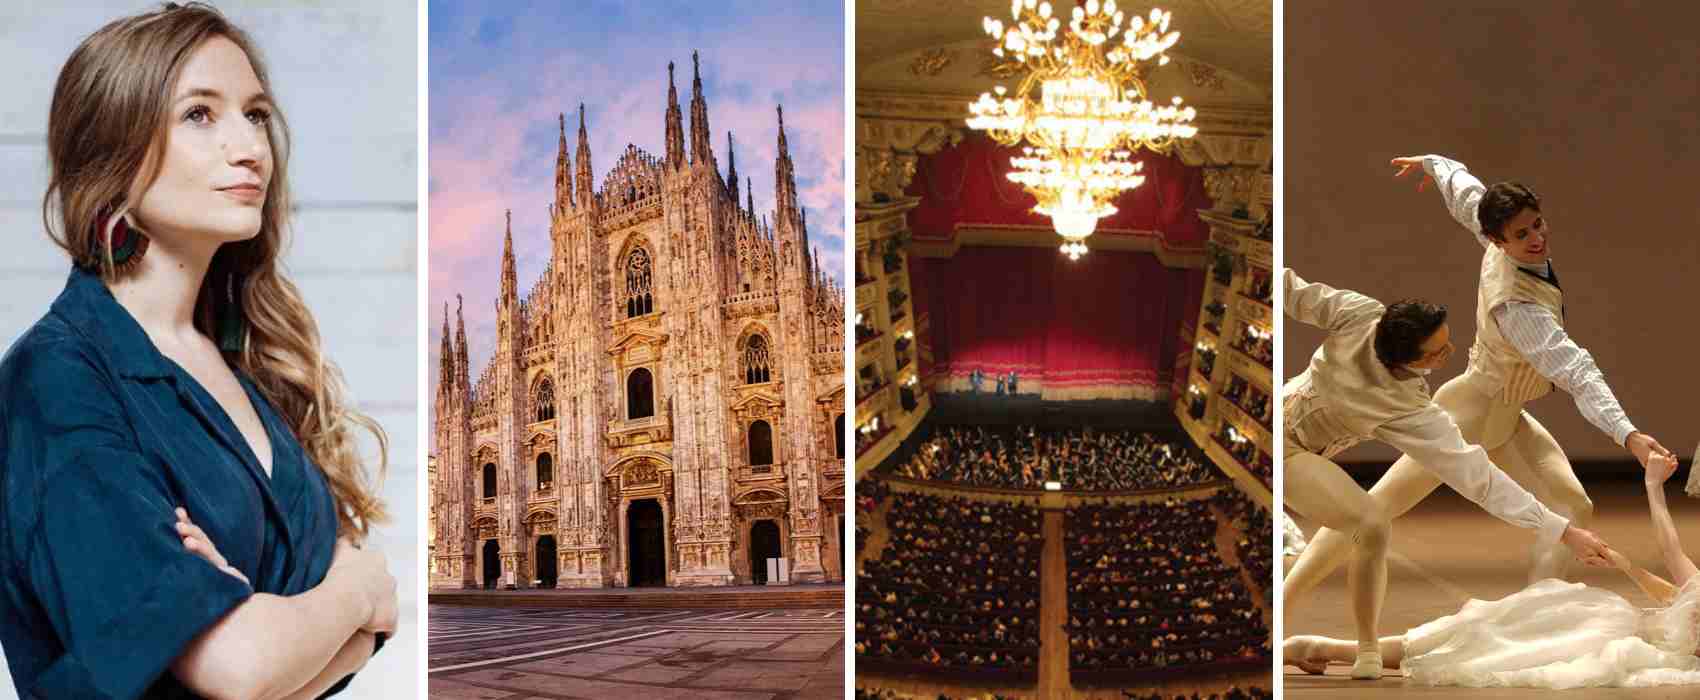 Milan from 14/10 to 17/10: Strauss and Chopin at La Scala